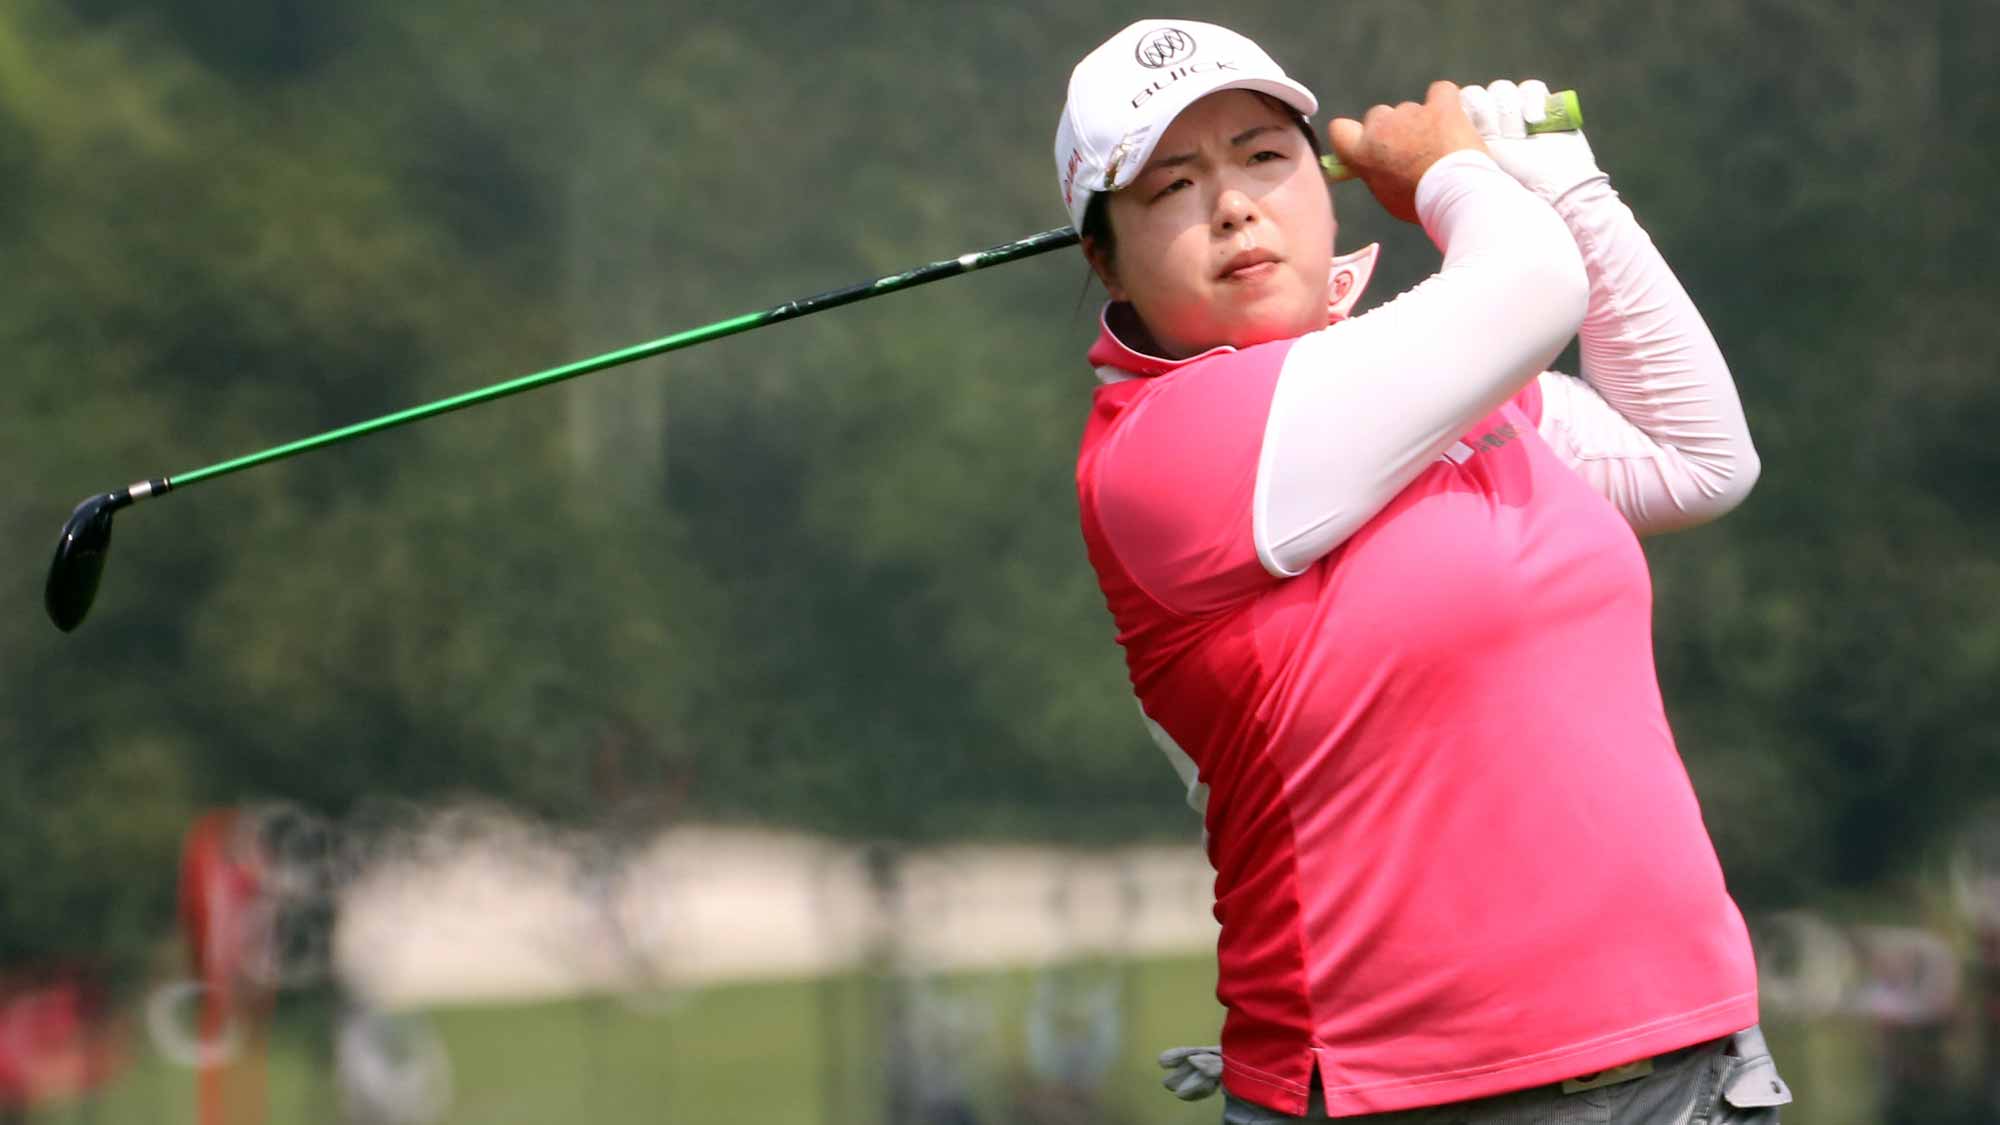 Shanshan Feng of China watches her 2nd shot on the 6th hole during round one of the Sime Darby LPGA Tour at Kuala Lumpur Golf & Country Club